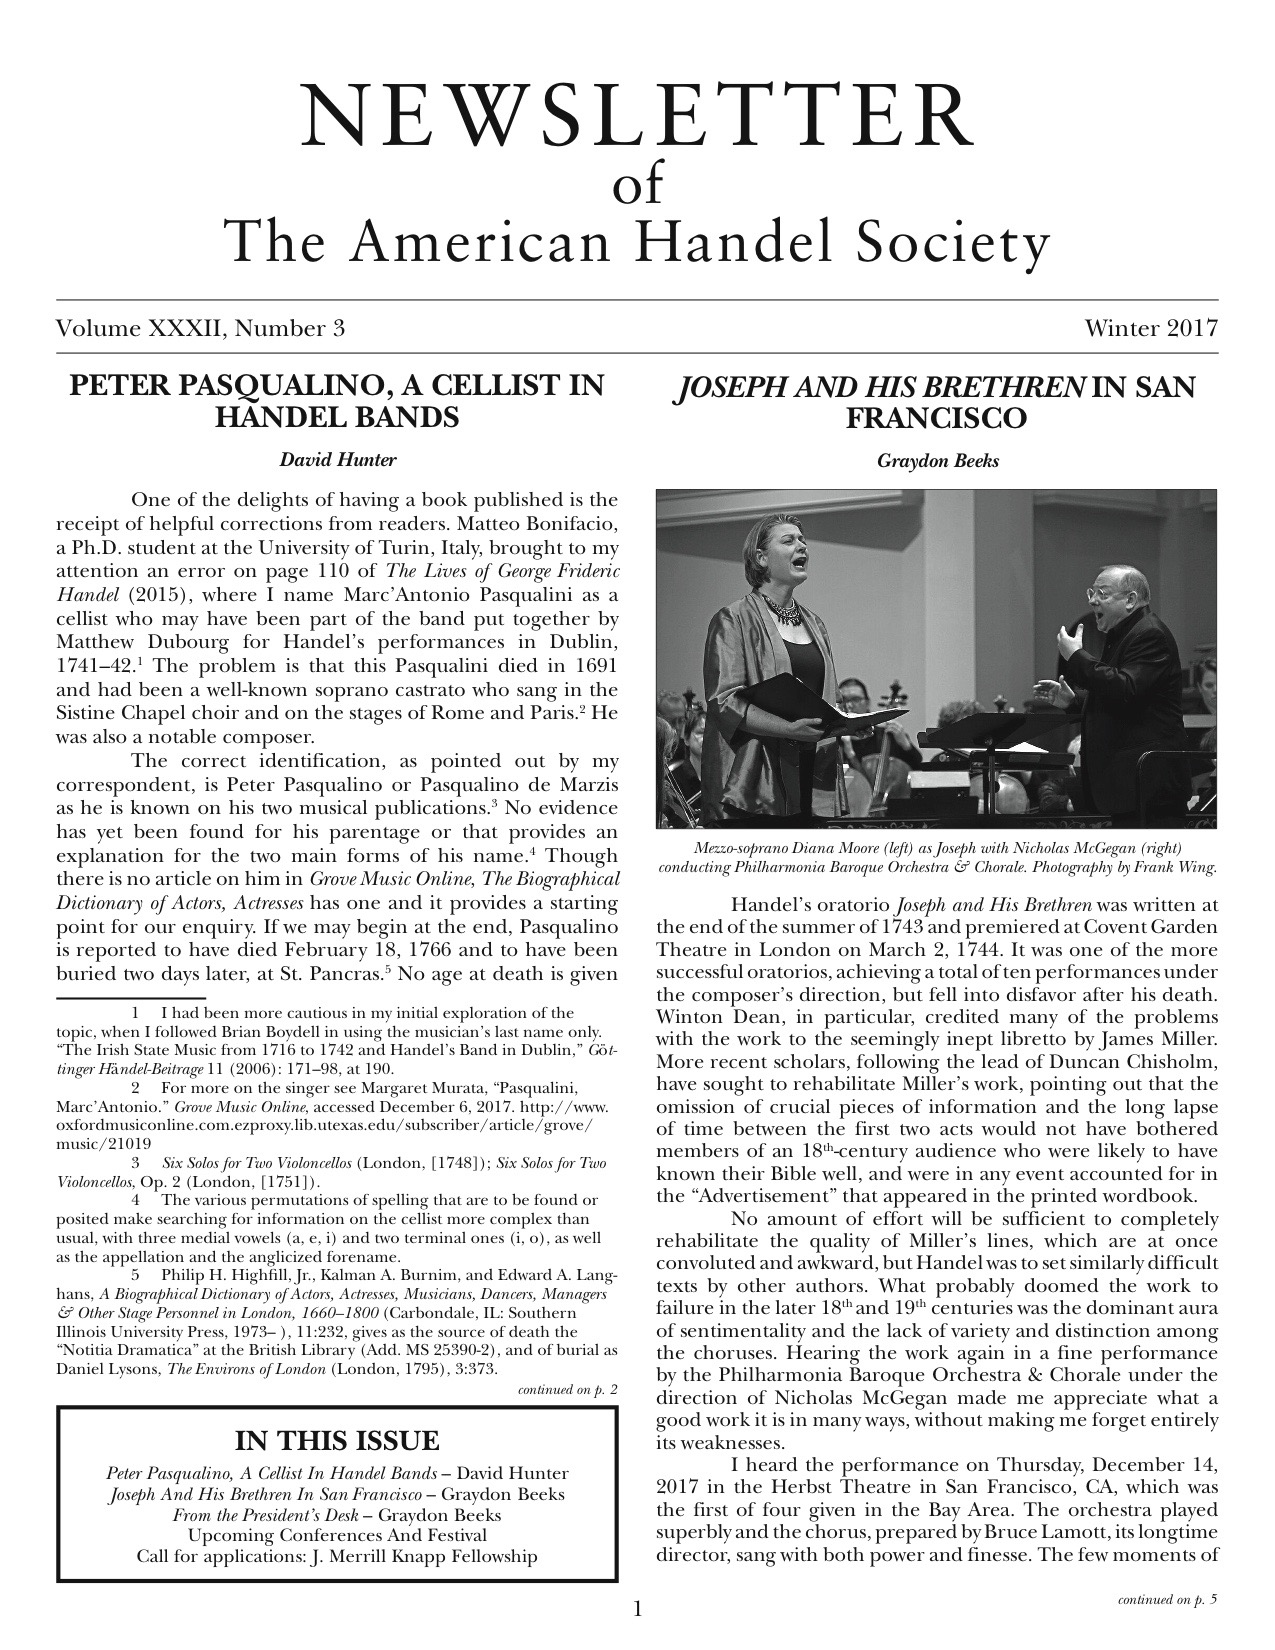 Front cover of American Handel Society Newsletter